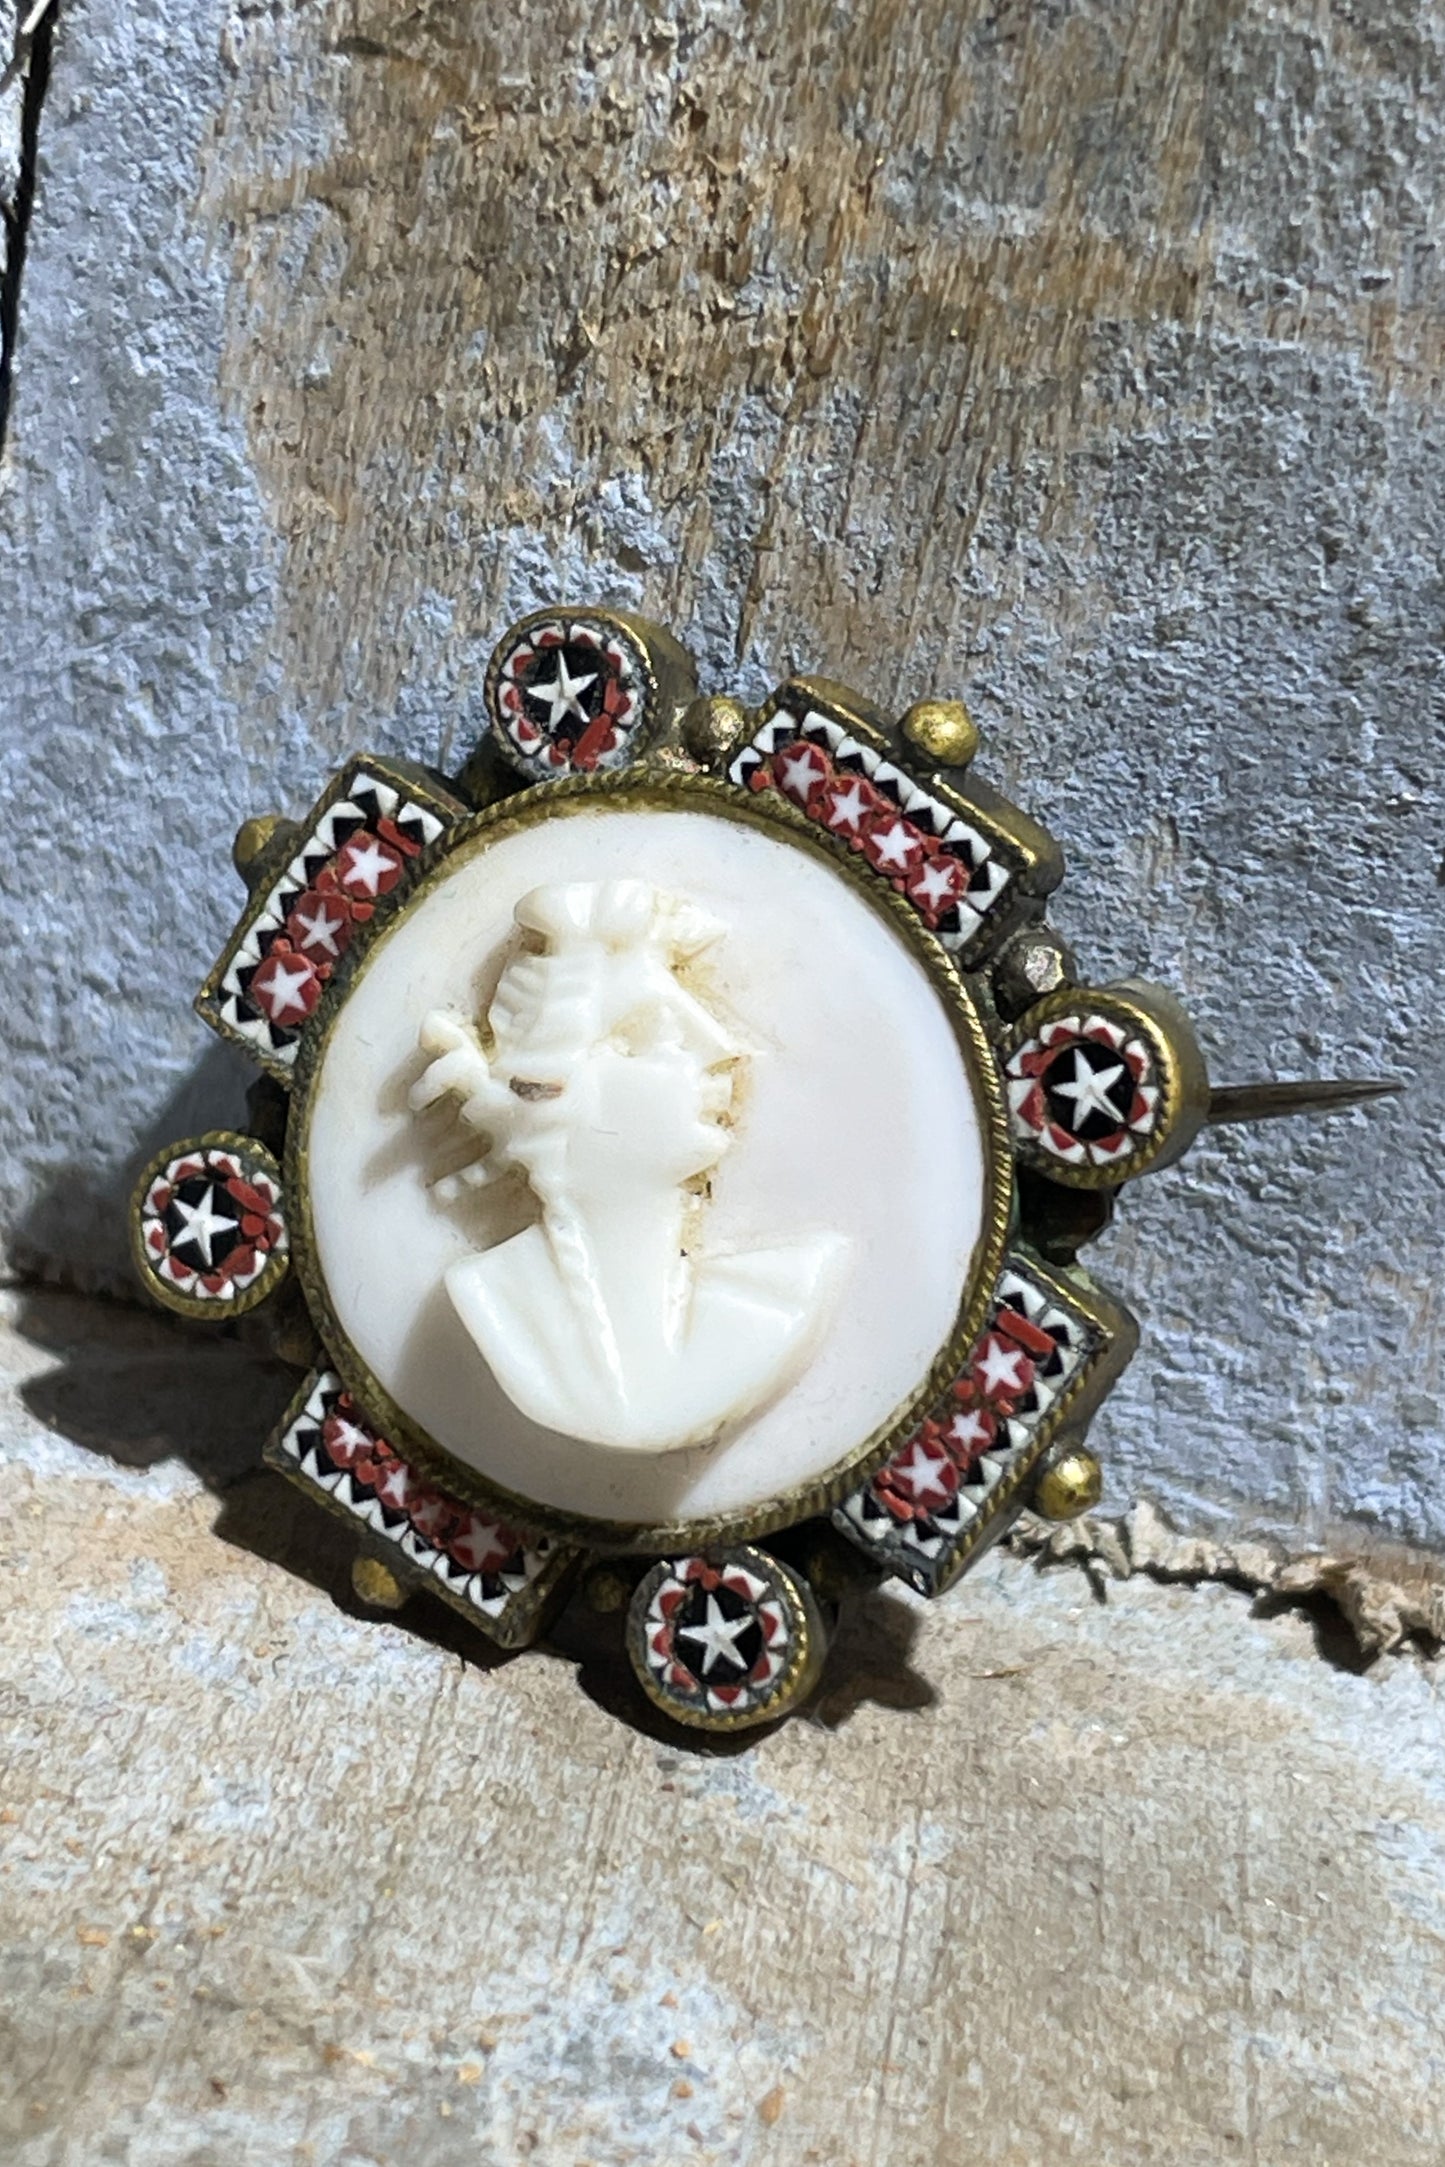 Antique micromosaic cameo brooch. Late XIX century